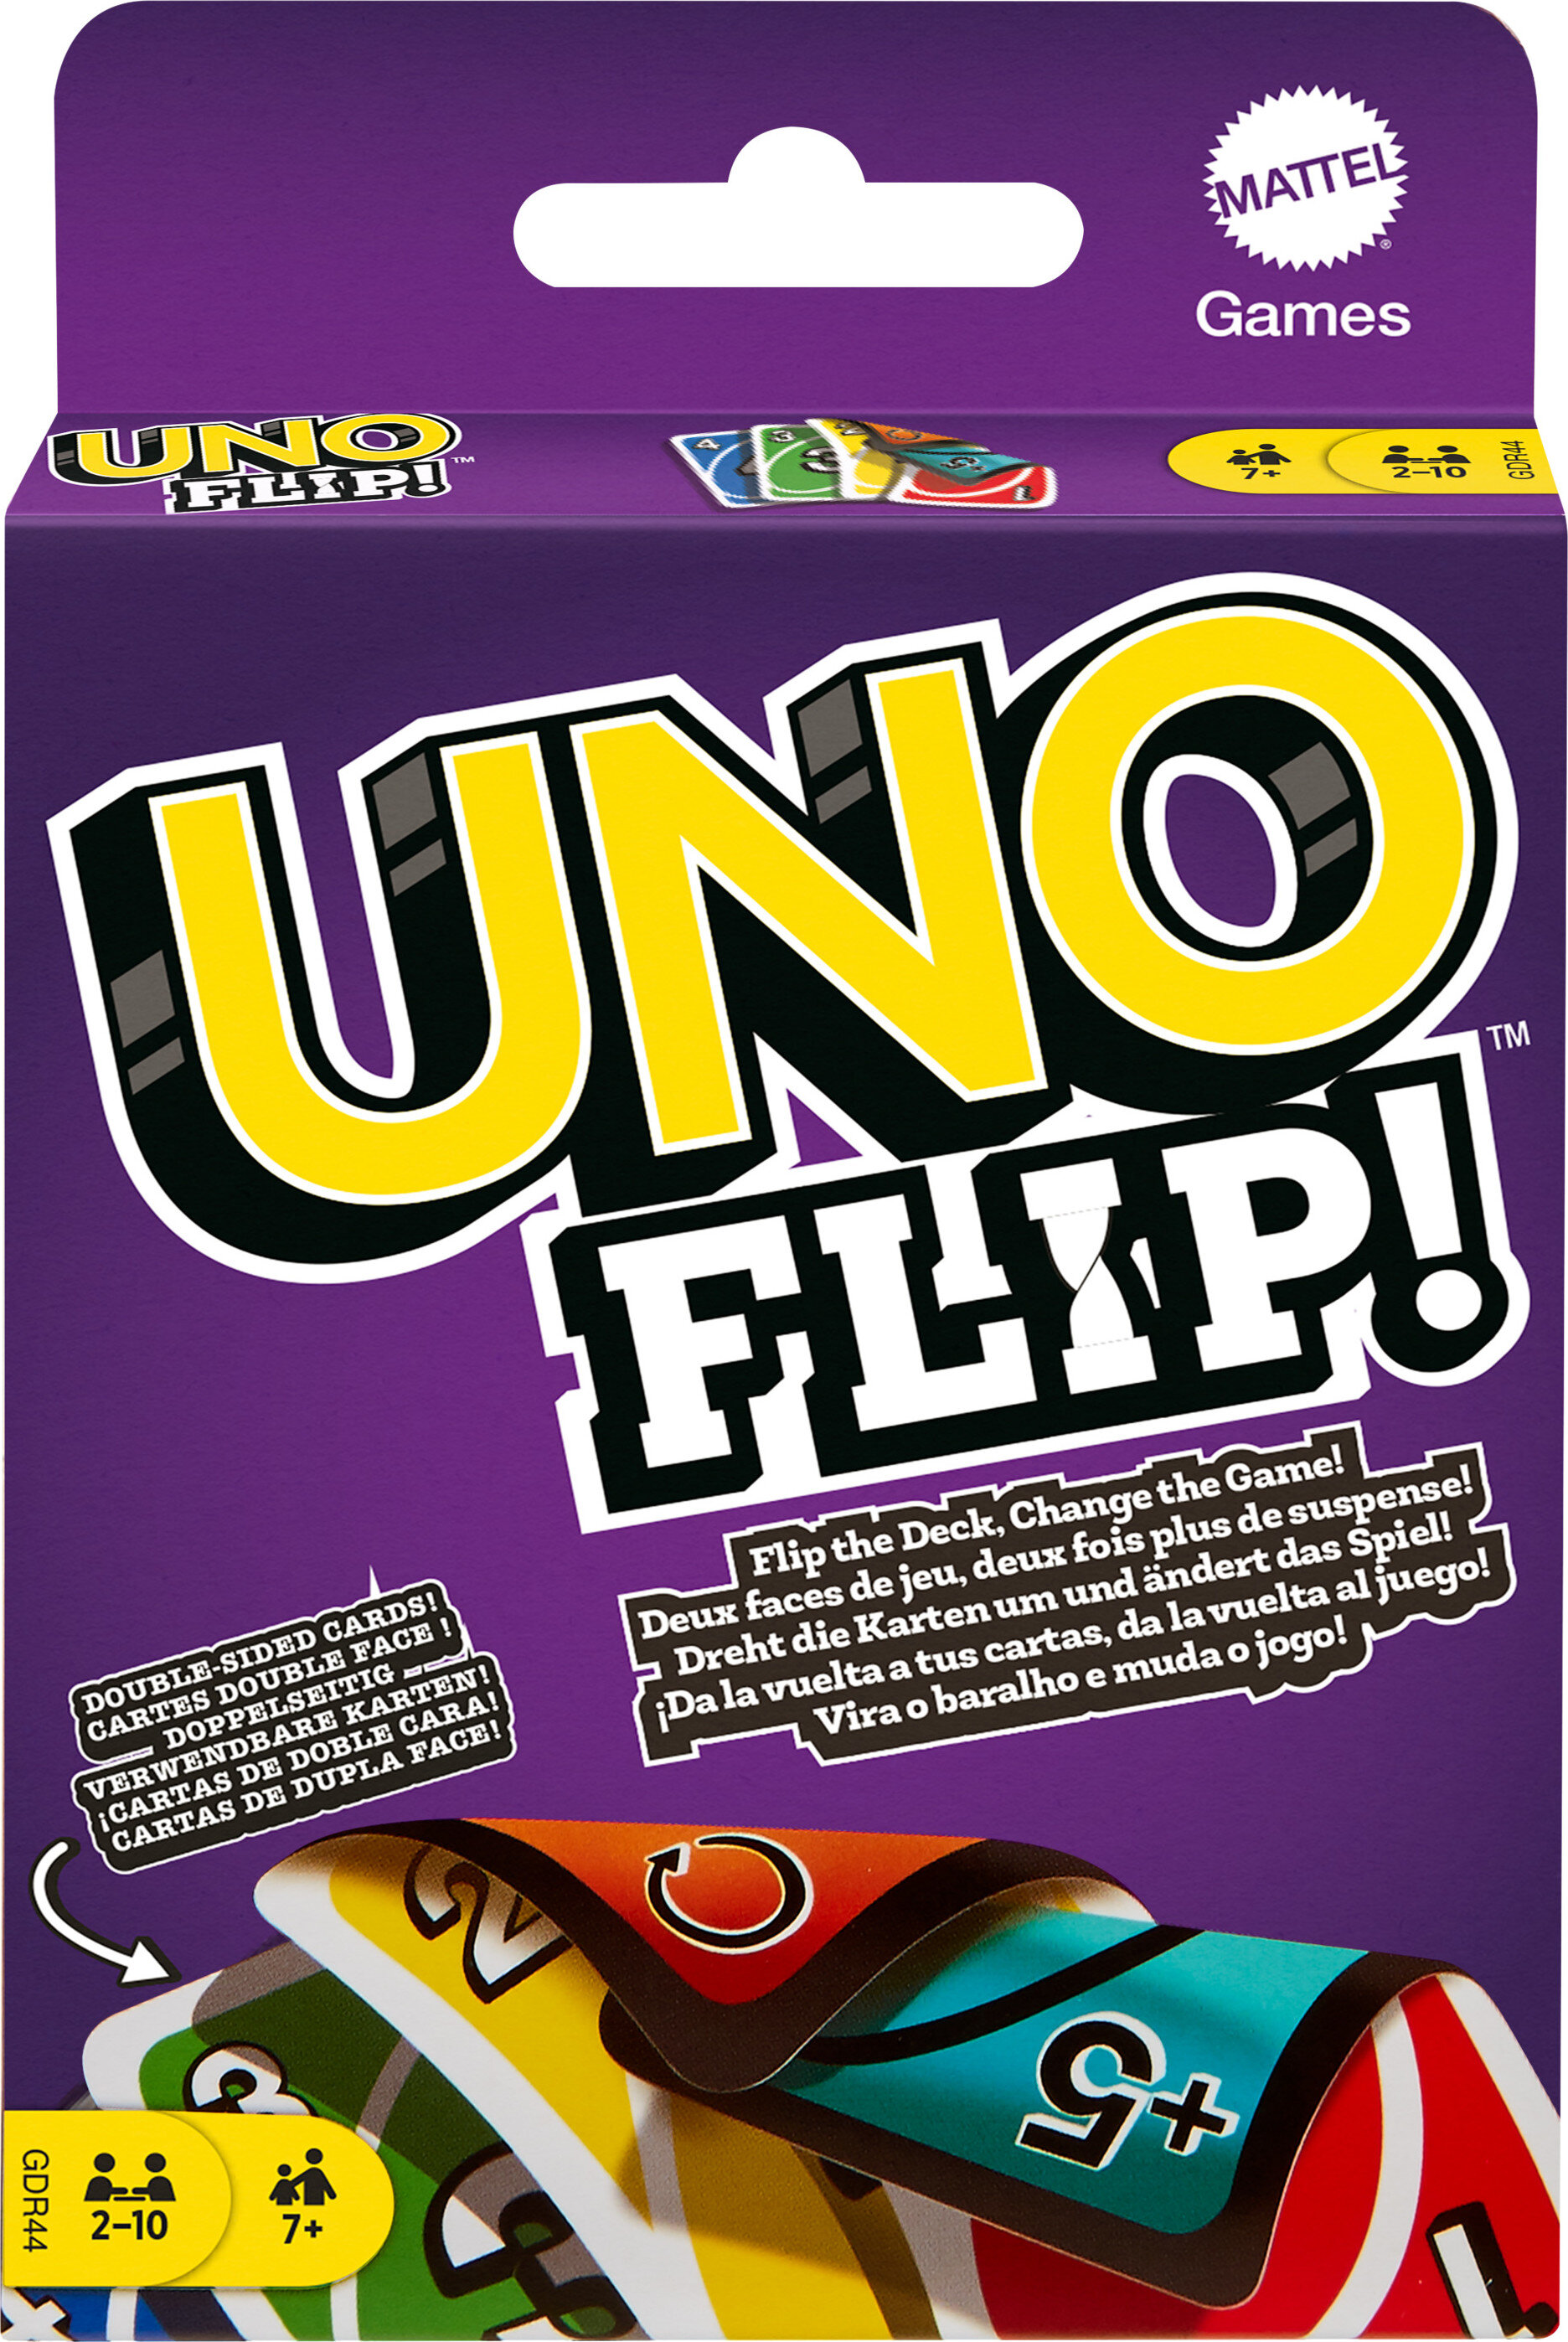 UNO Flip! Card Game for Kids, Adults & Family Night with Double-Sided Cards, Light & Dark - image 1 of 7